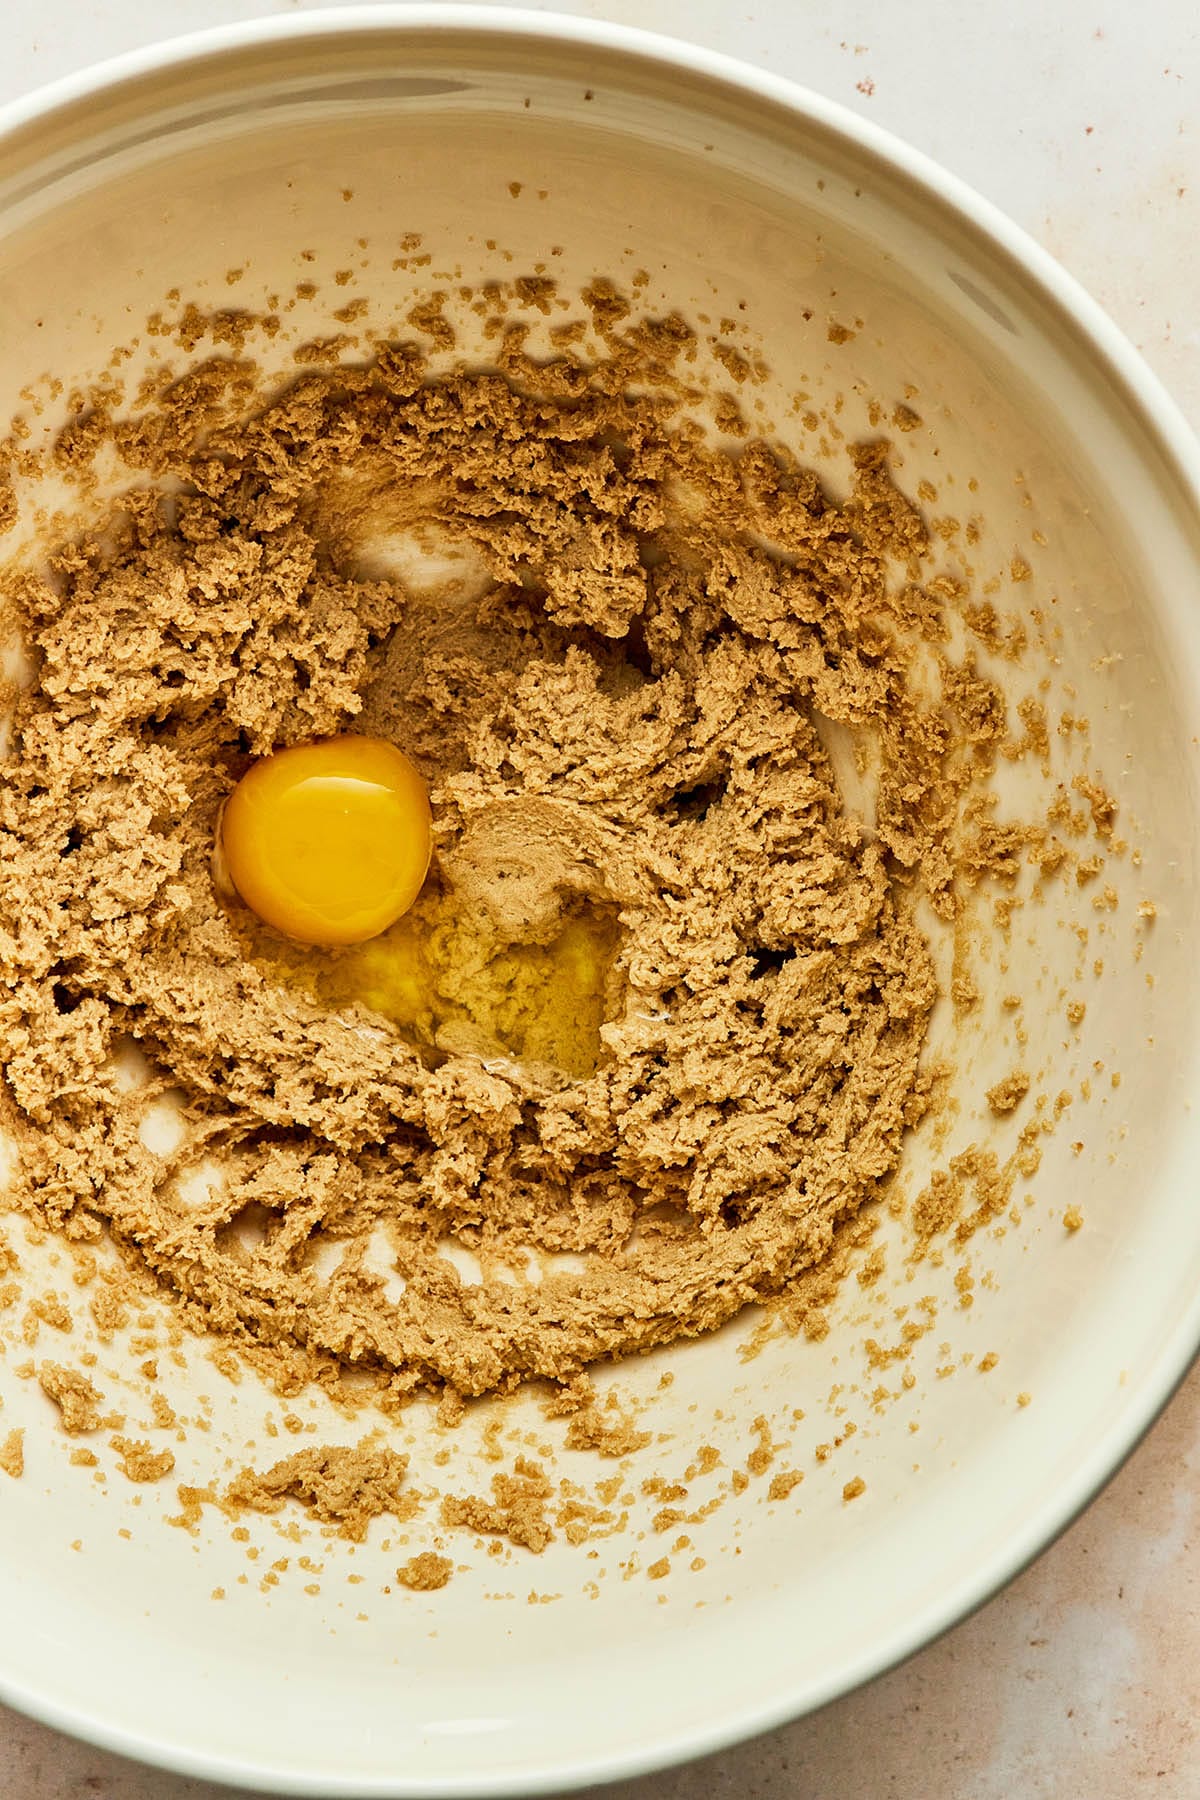 Overhead image of an unmixed eeg in a bowl of creamed butter and sugar.